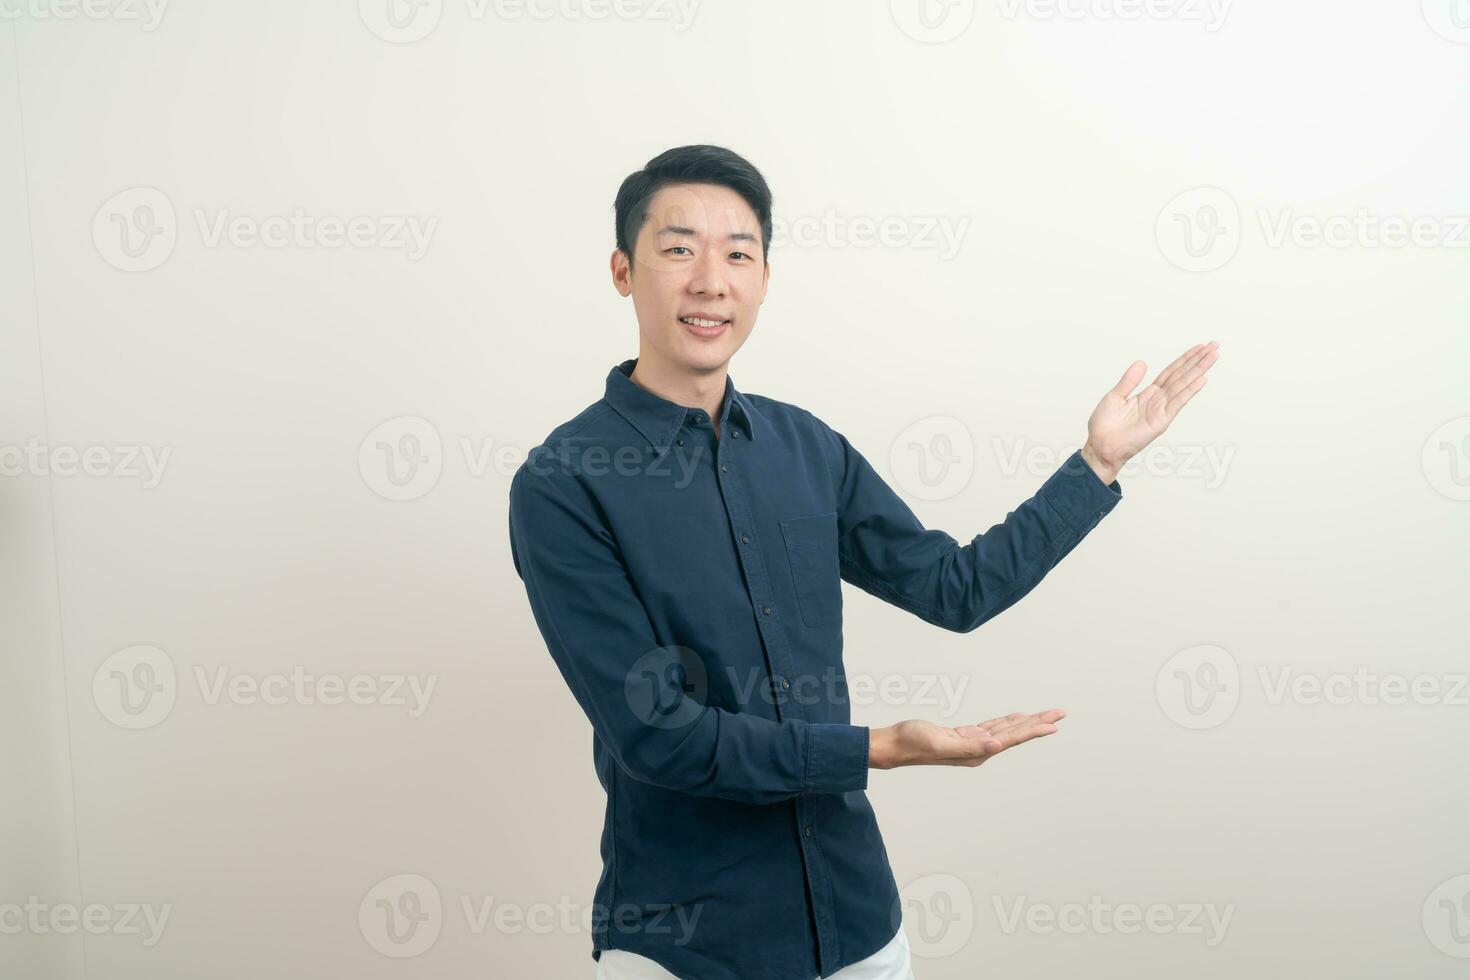 Asian man with hand pointing or presenting on white background photo